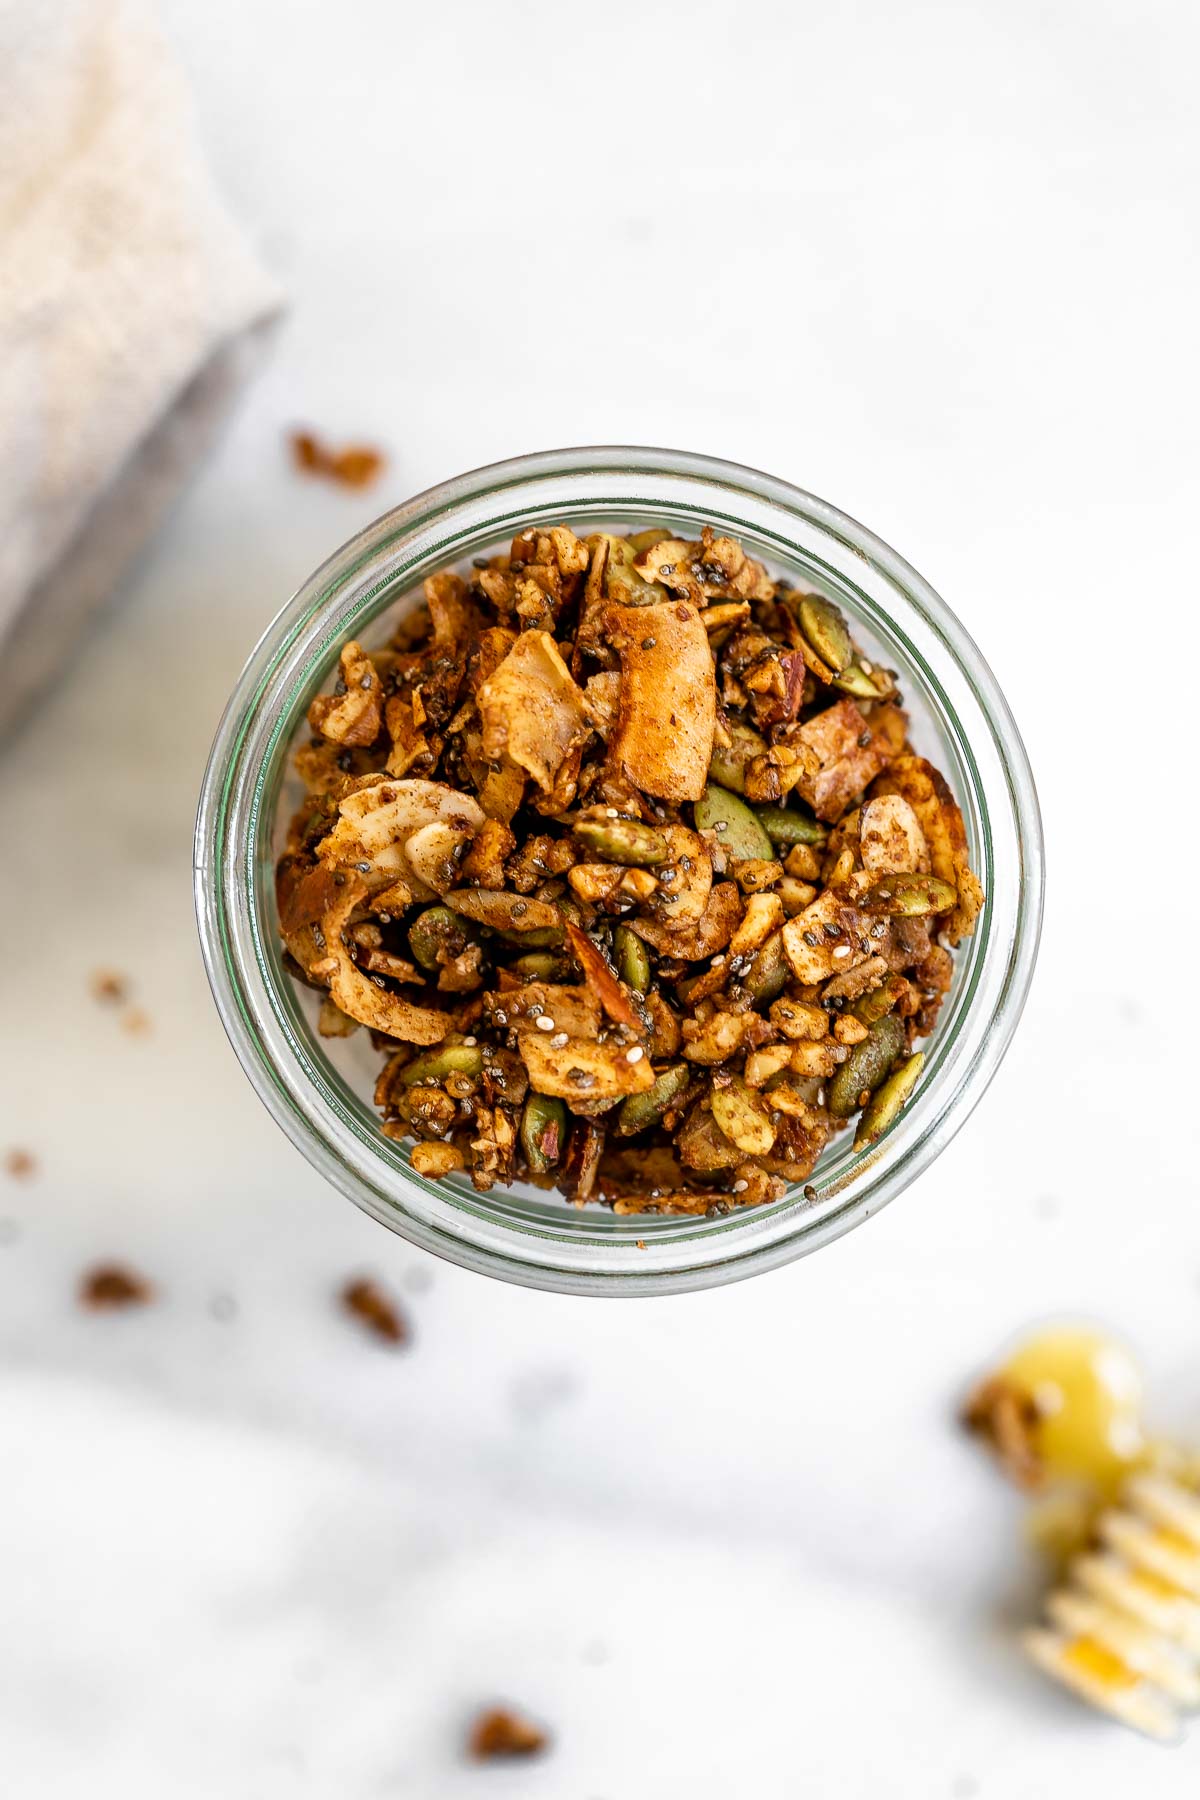 Paleo granola in a glass jar with honey on the side.